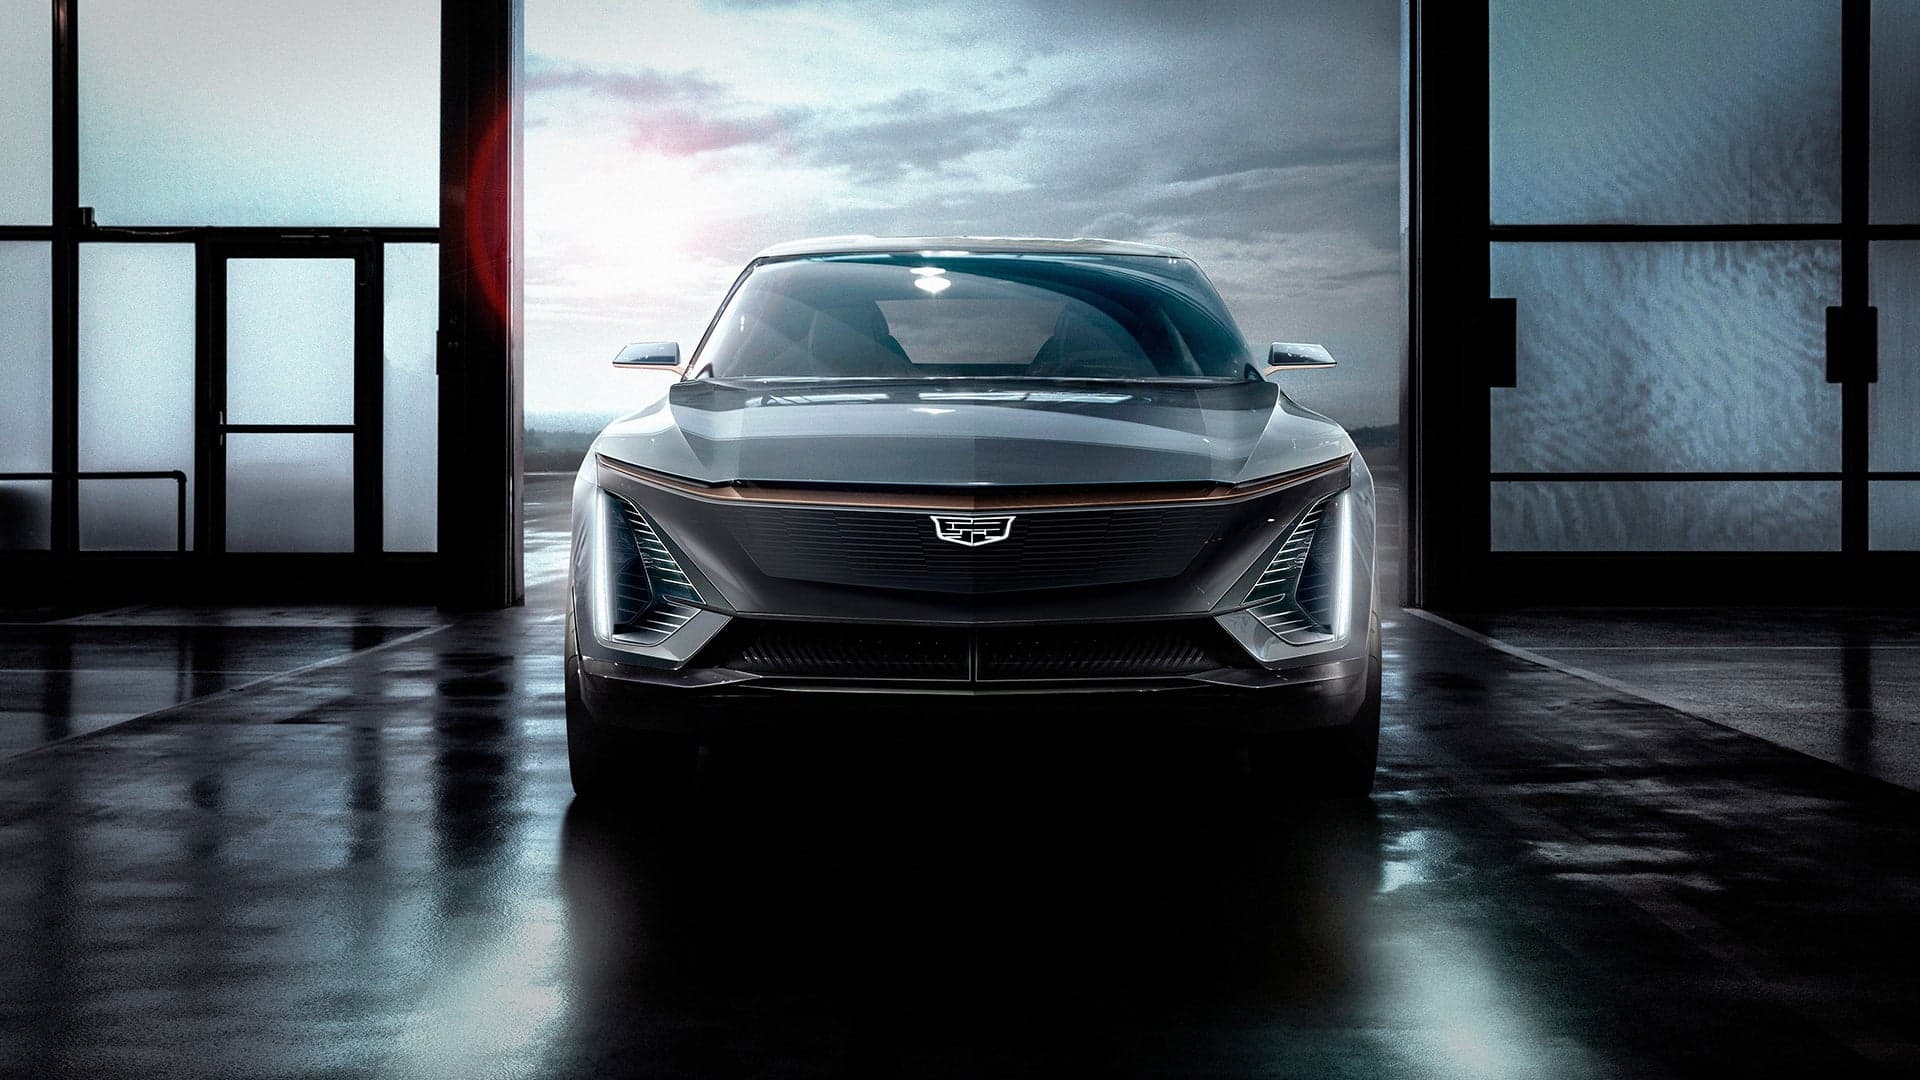 GM President Says Cadillac Has ‘One Chance’ at an American Comeback